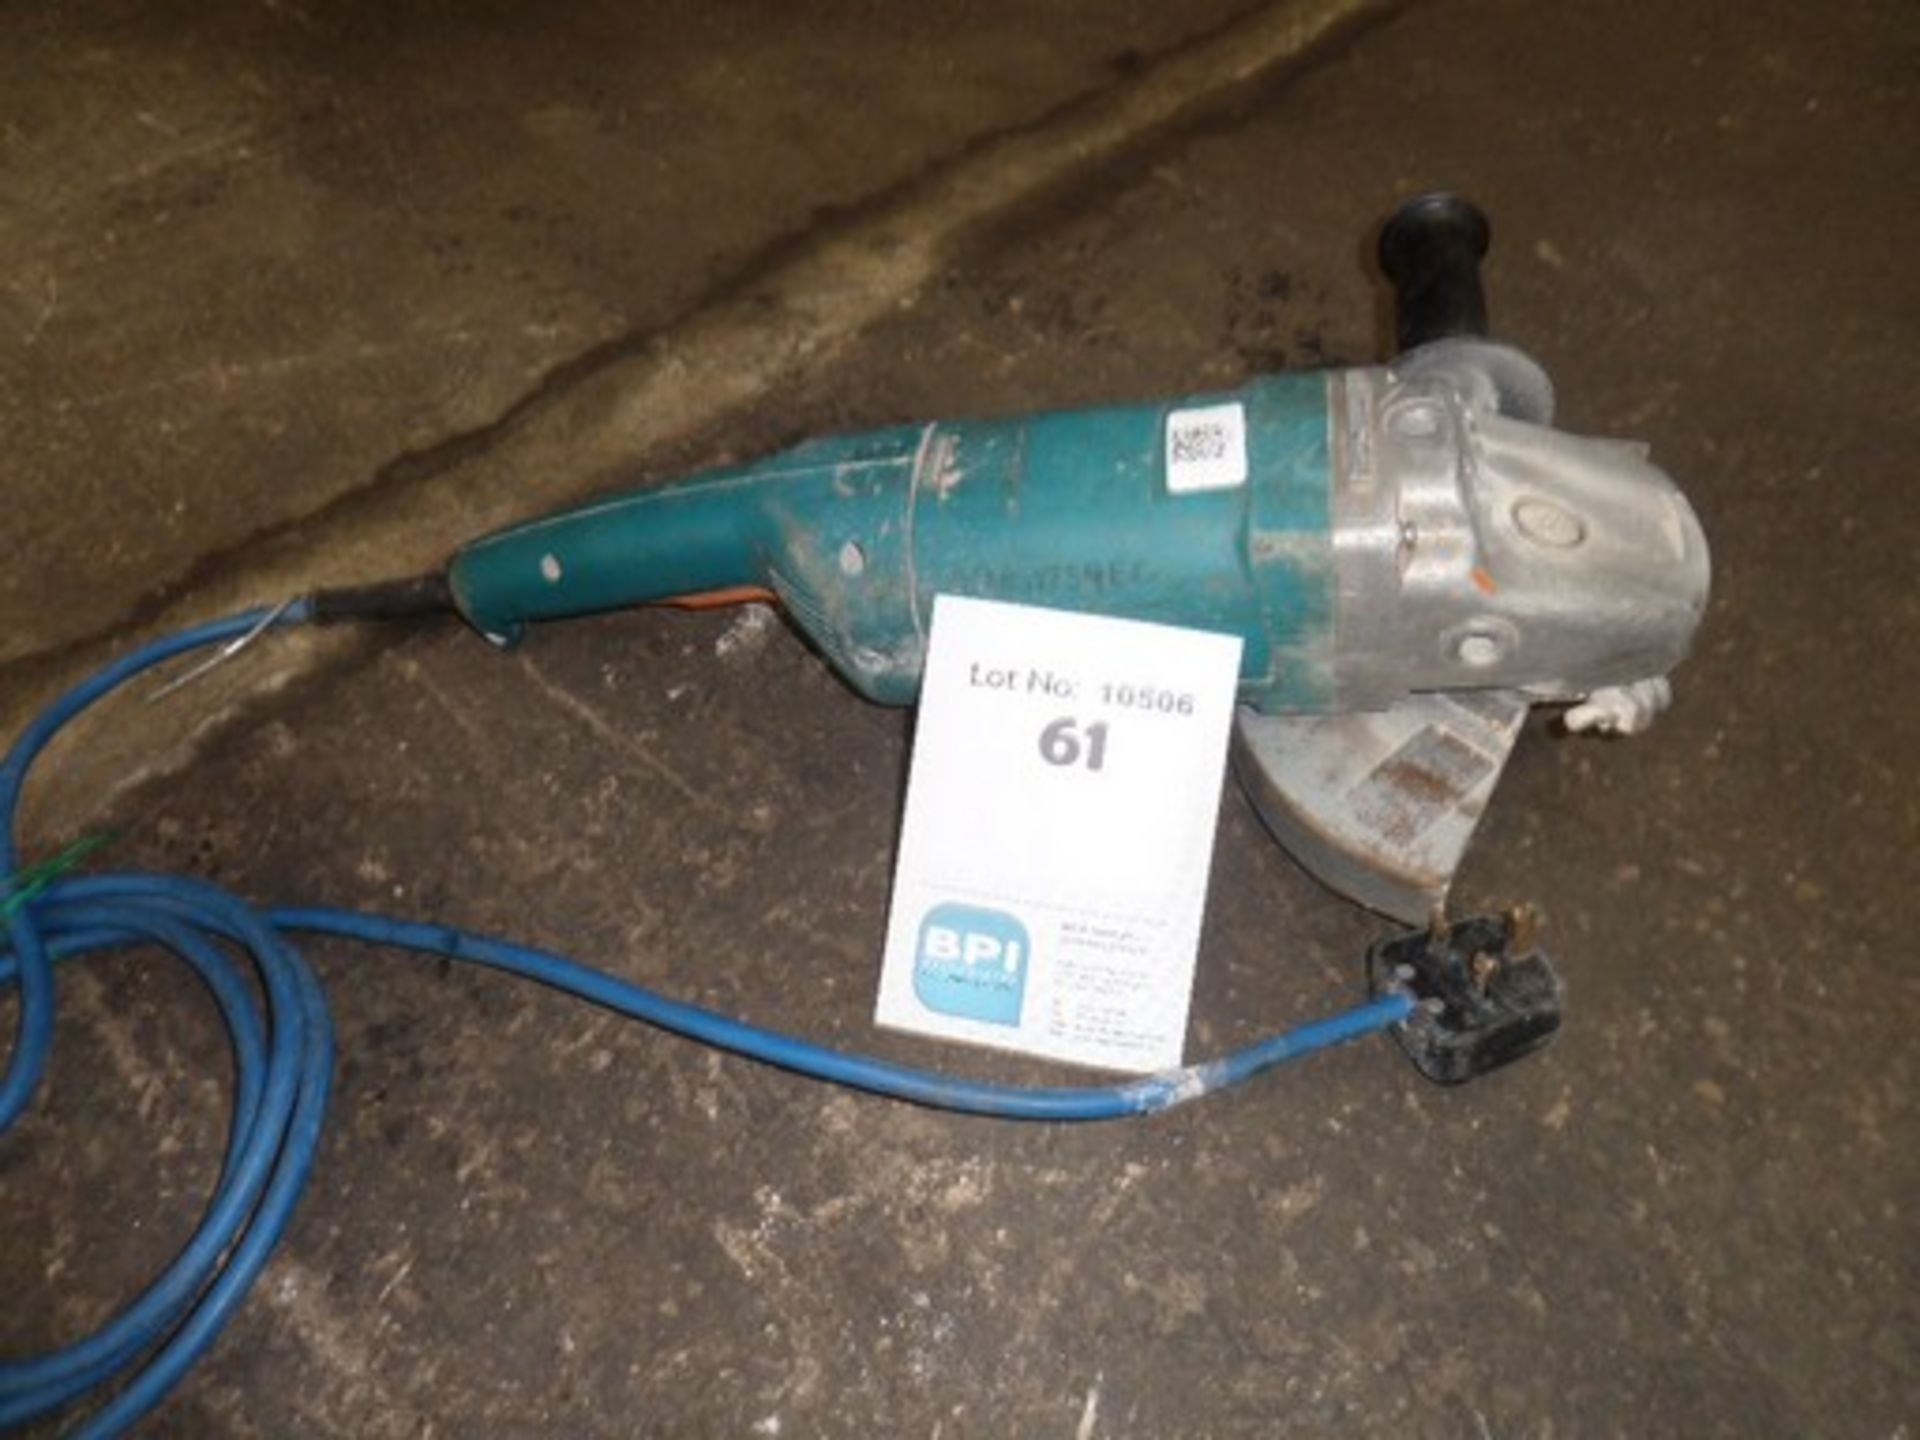 MAKITA Unknown {015218} ANGLE GRINDER 230MM/ 9 Power there when tested but does require new blade.